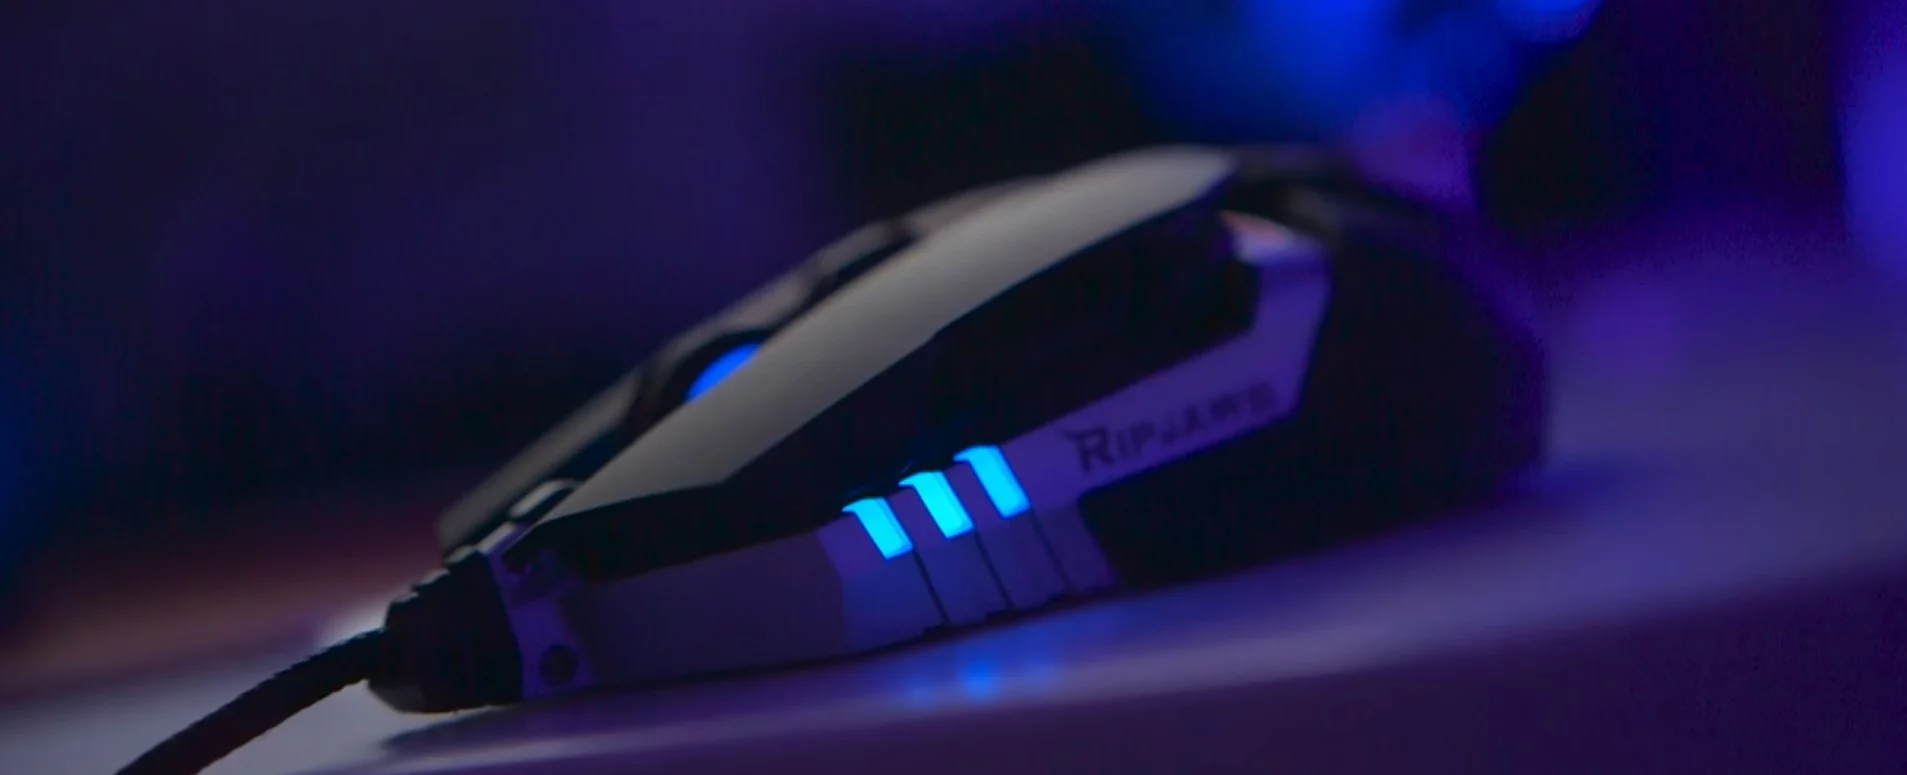 G.Skill RIPJAWS MX780 Review - Gamers Reviewed